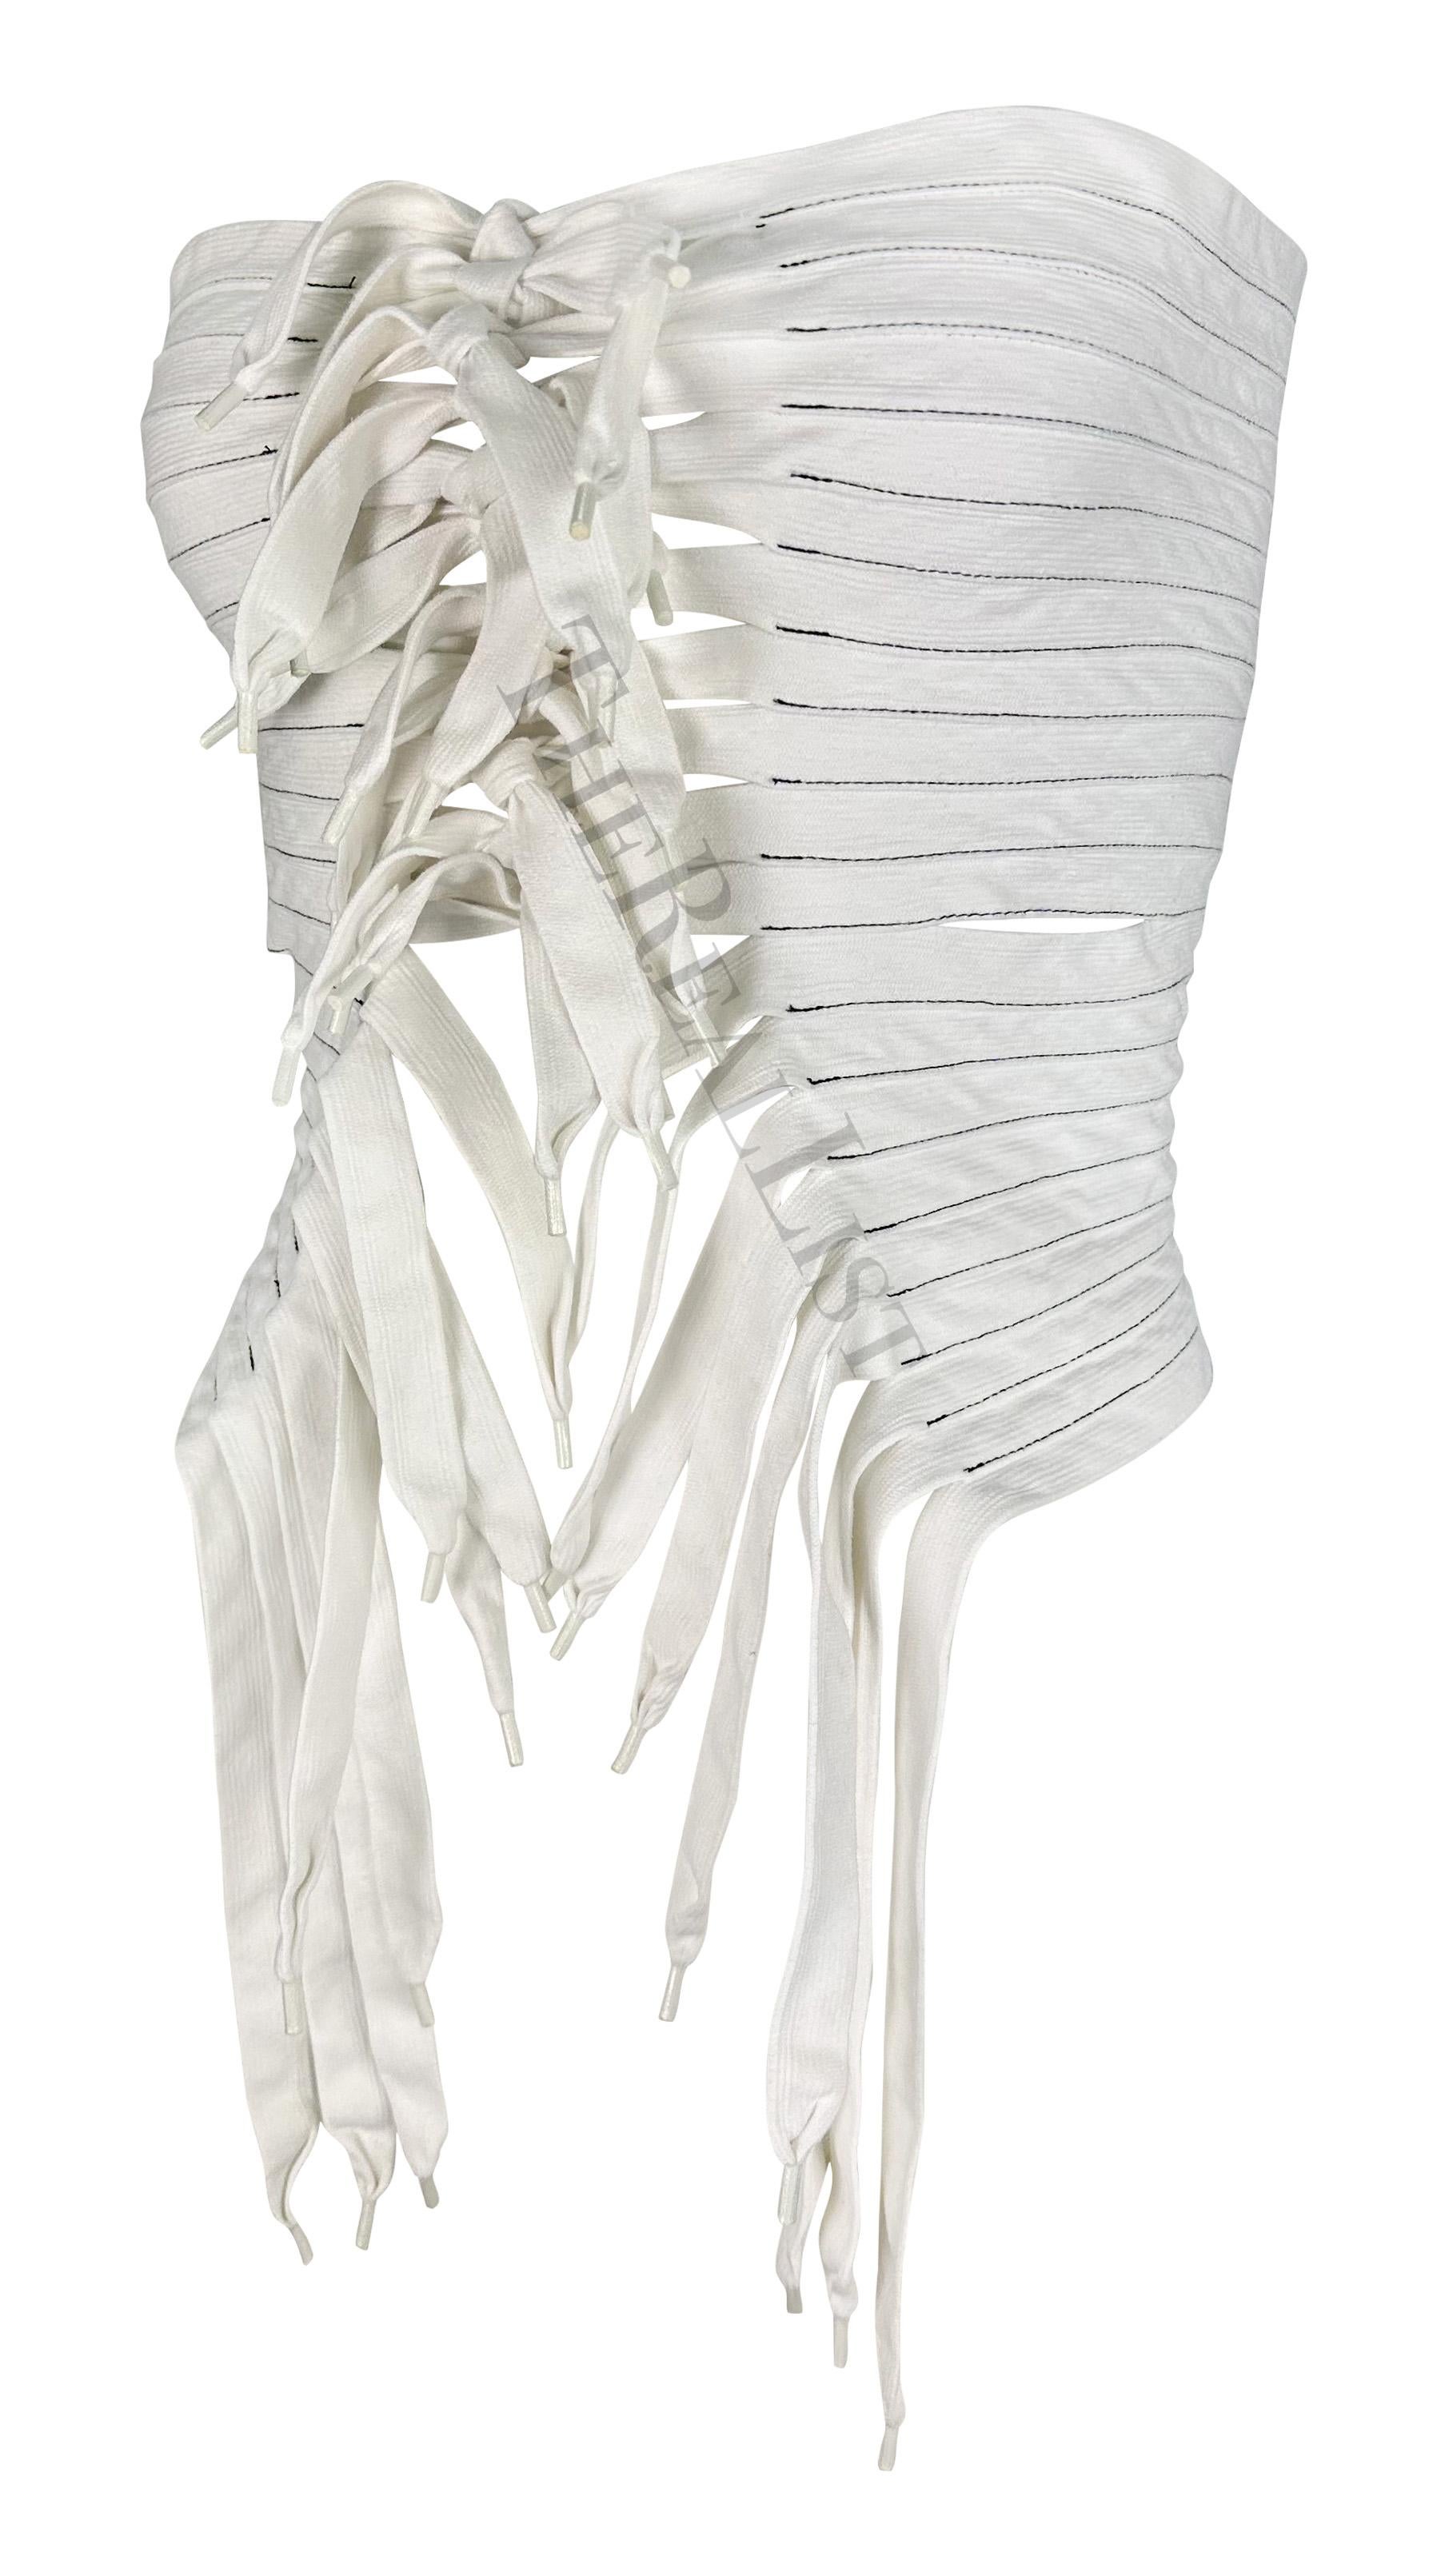 S/S 2004 Margiela Haute Couture Artisanal Repurposed Shoelace White Crop Top  In Good Condition In West Hollywood, CA